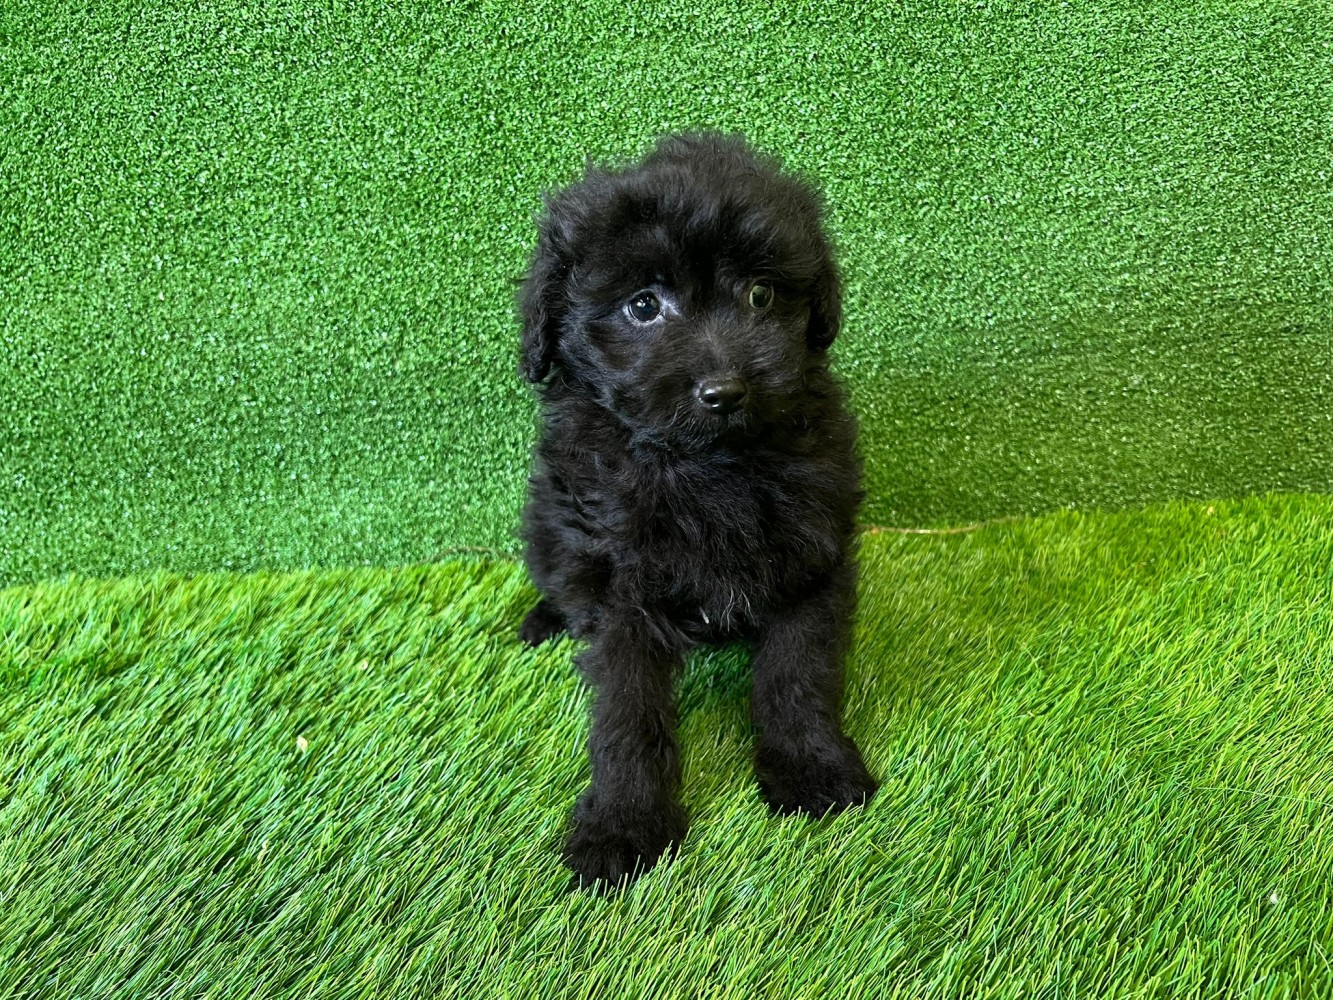 Crossbreed Miniature Spitz x Poodle Puppy for sale